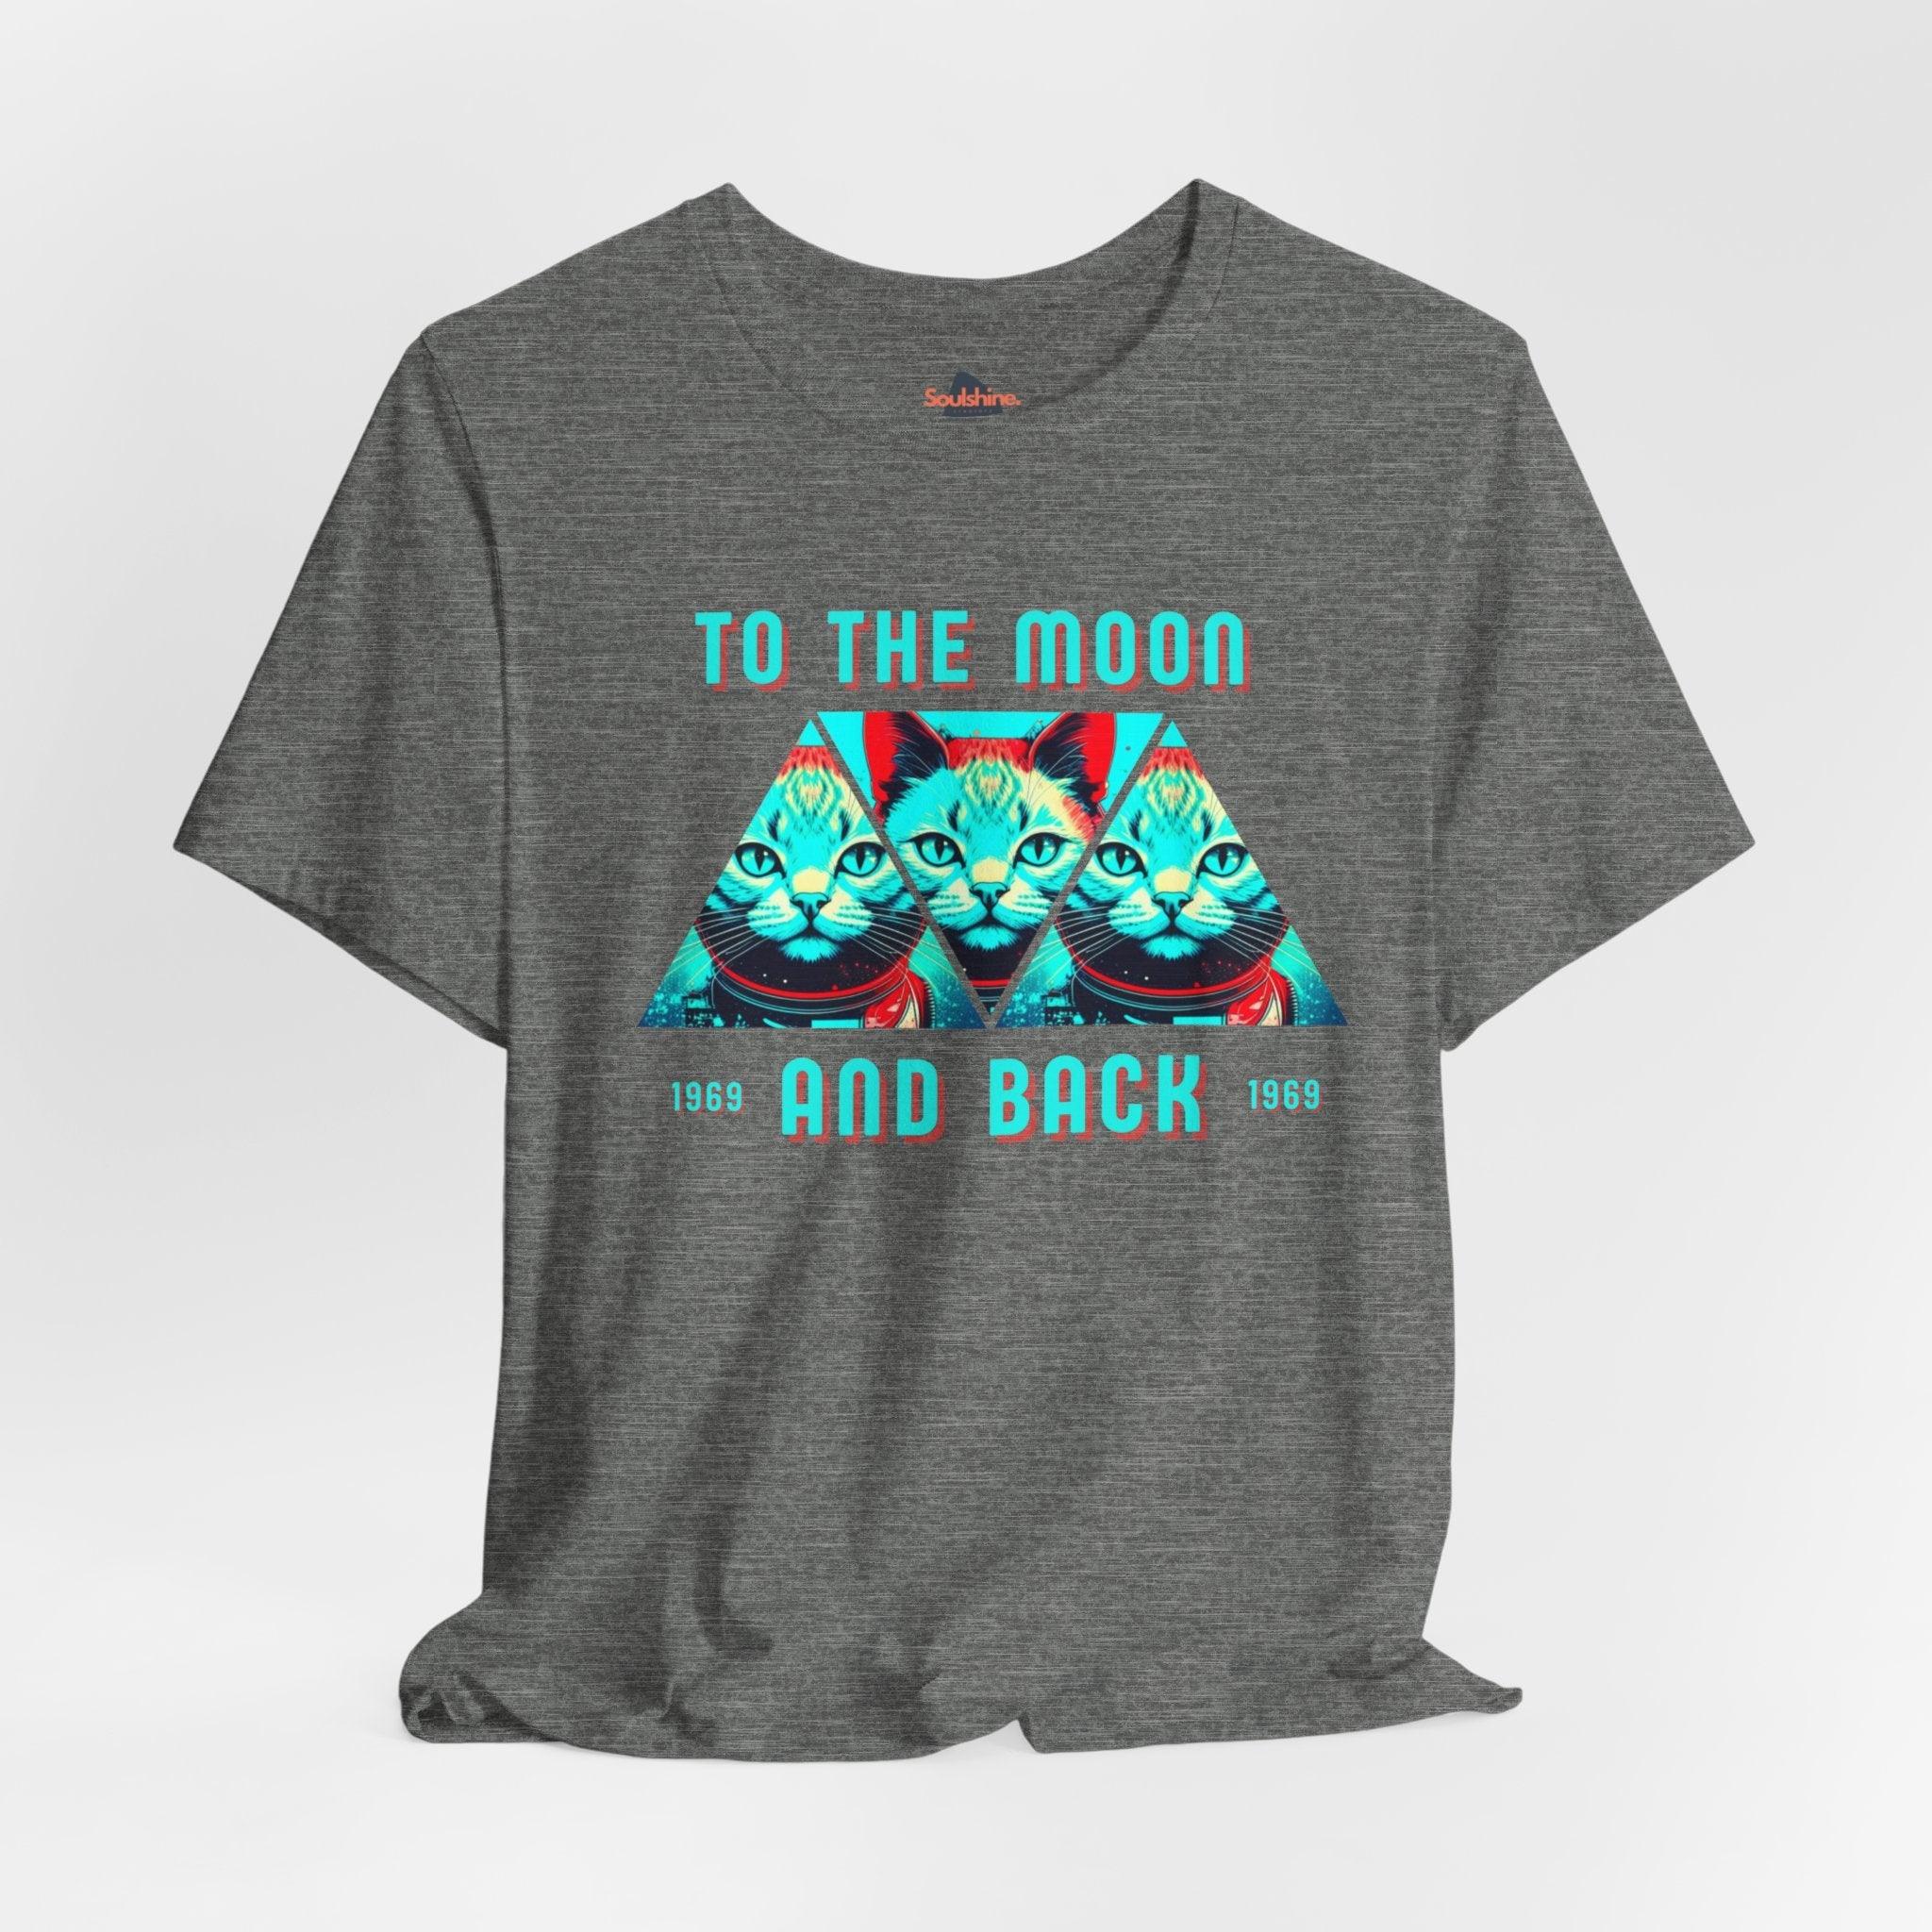 To the moon and back - Soulshinecreators - Unisex Jersey Short Sleeve Tee - US Deep Heather S T-Shirt by Soulshinecreators | Soulshinecreators